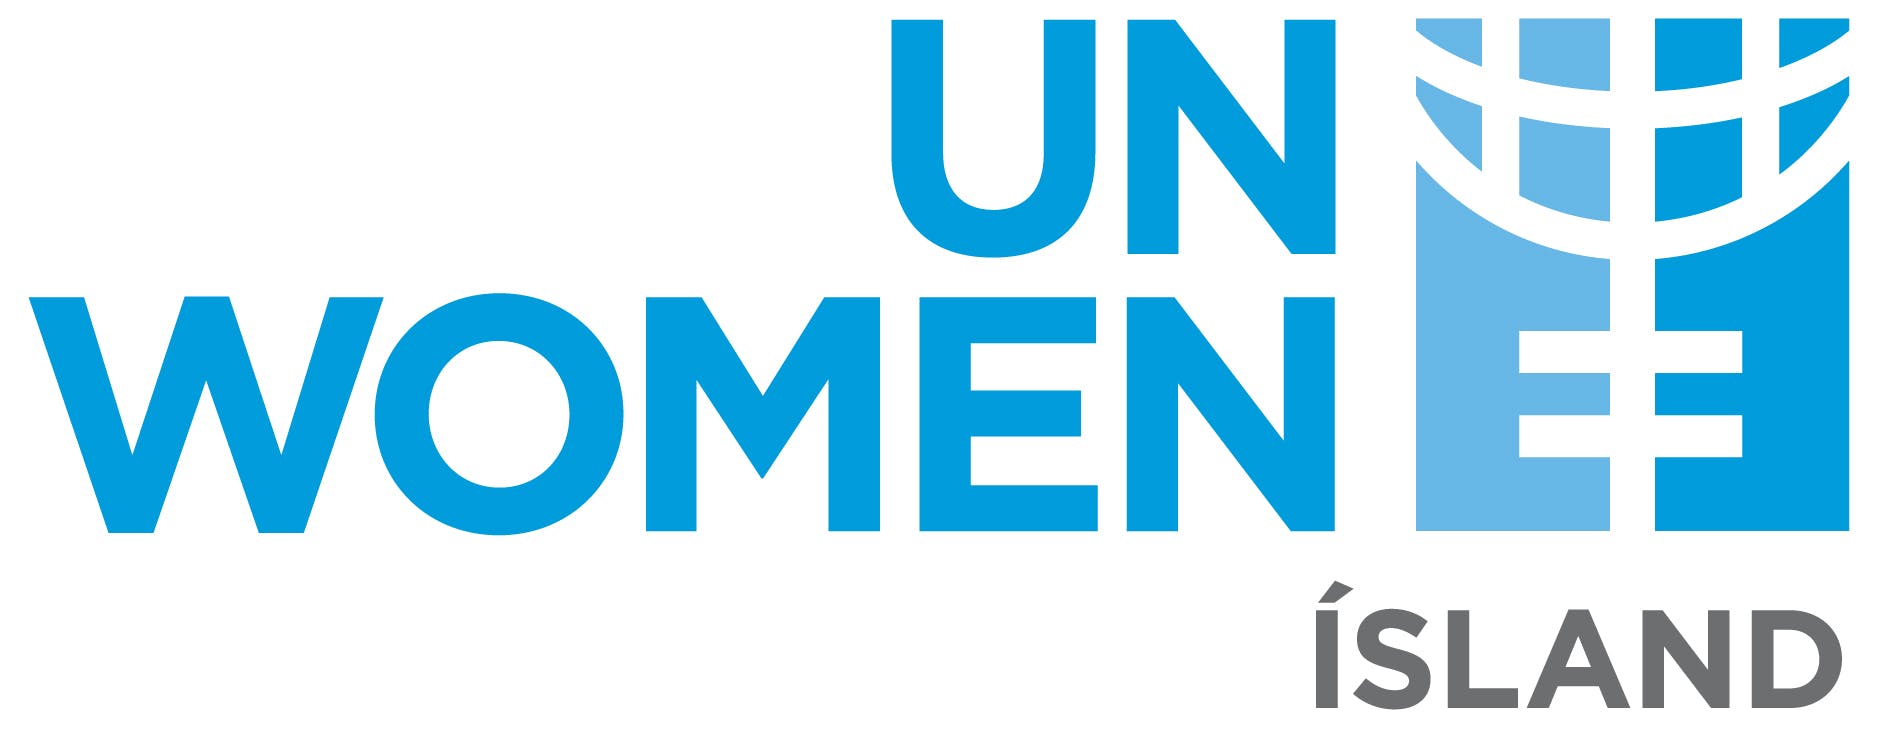 UN Women National Committee Iceland